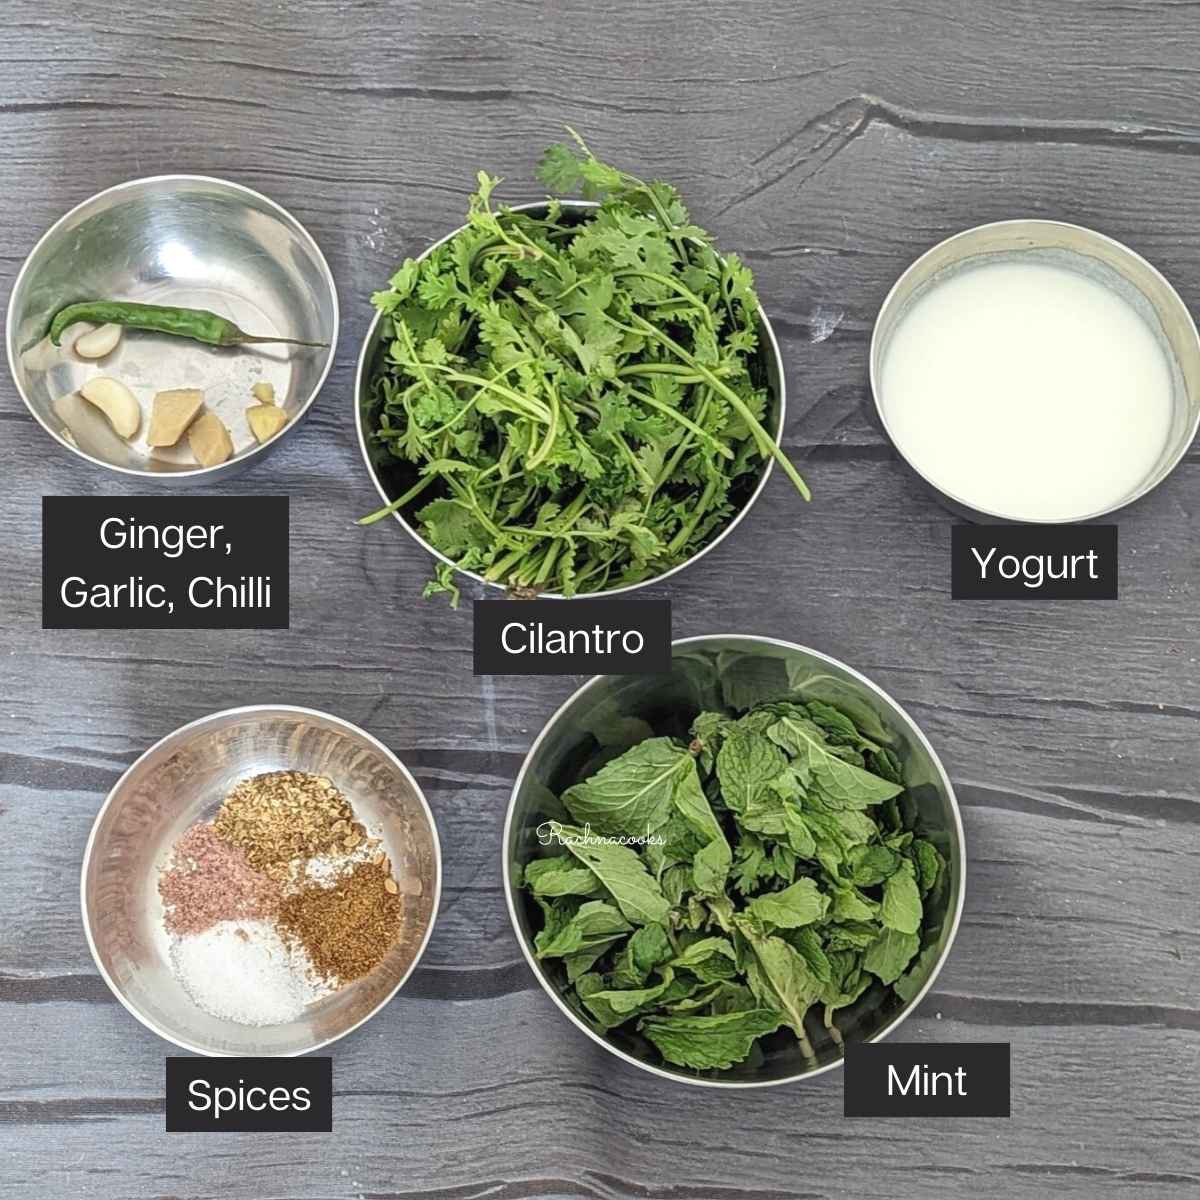 Ingredients for indian mint chutney: yogurt, cilantro leaves, mint, ginger, garlic, chillies and spices in bowls